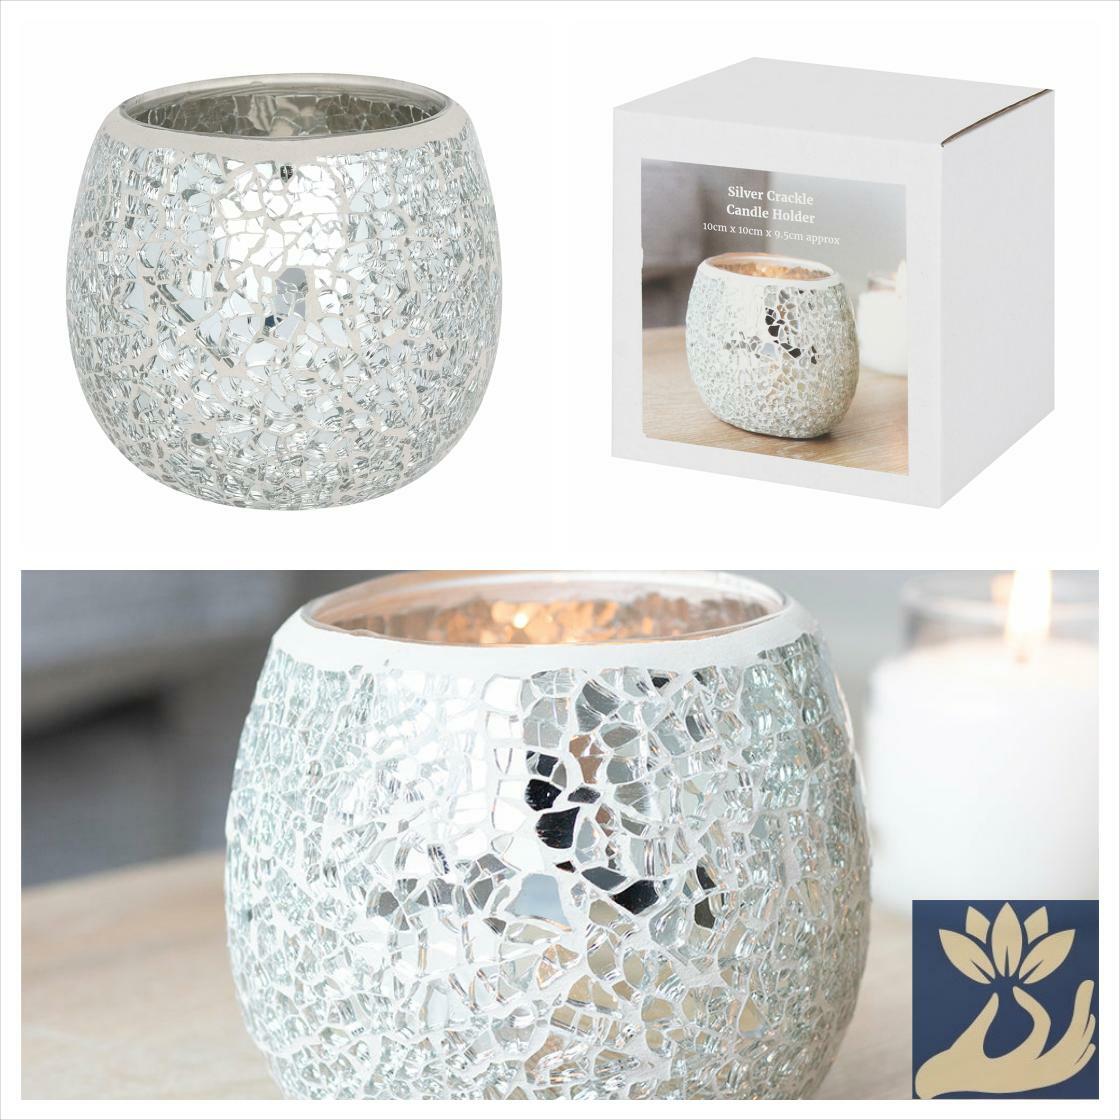 Just in! This unique Large Silver Crackle Glass Candle Holder for £8.50. 
ivelinaswaxmelts.com/products/large…